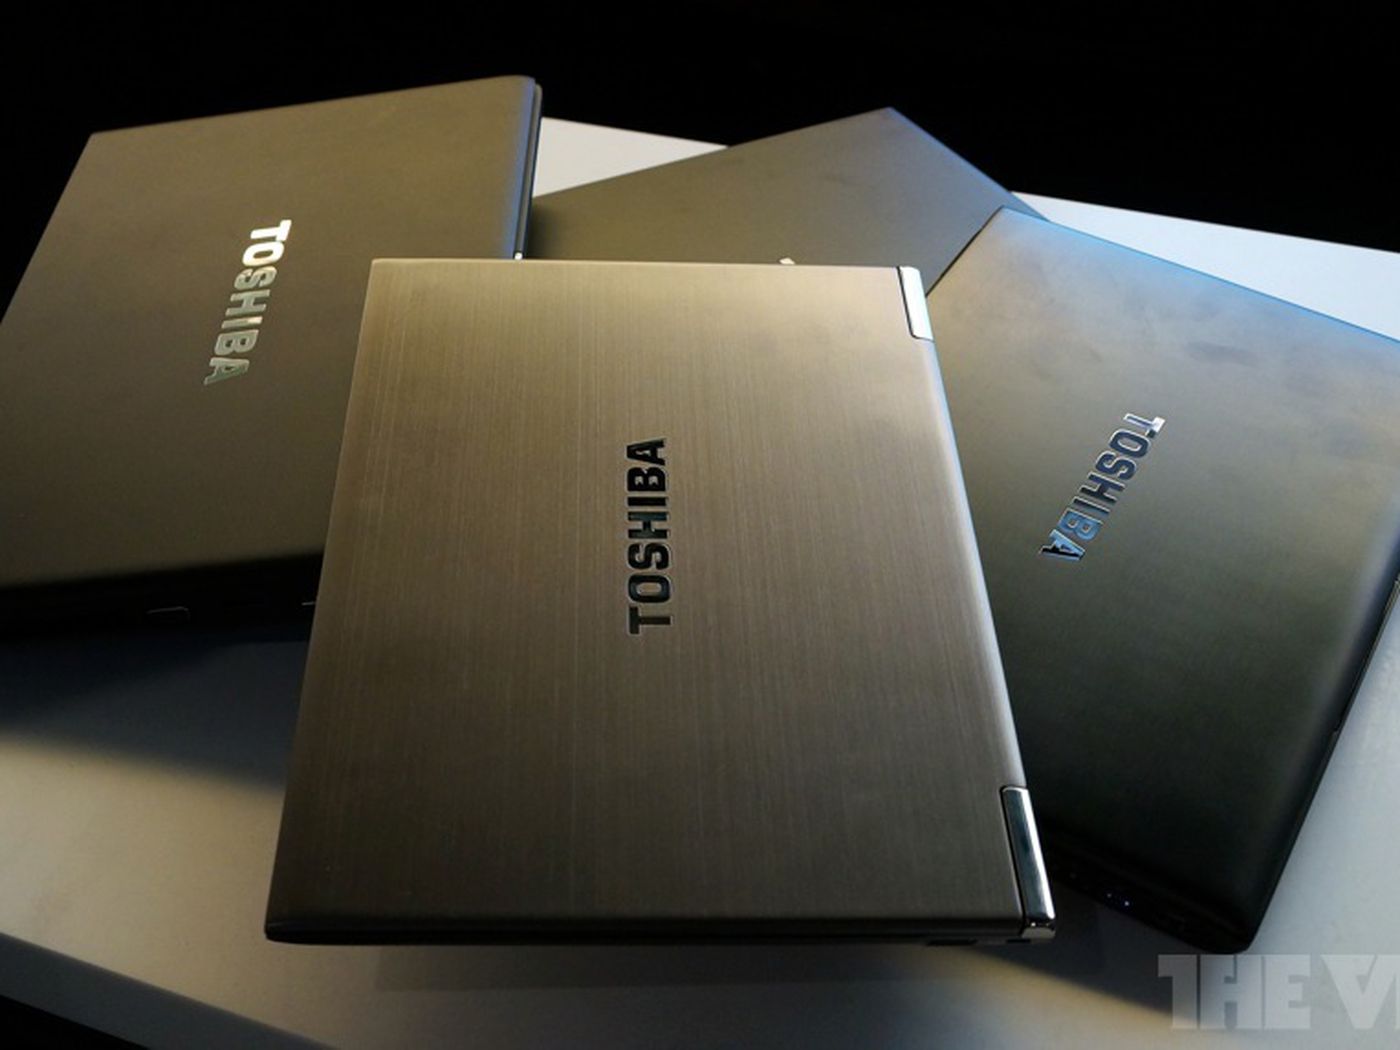 toshiba is officially out of the laptop